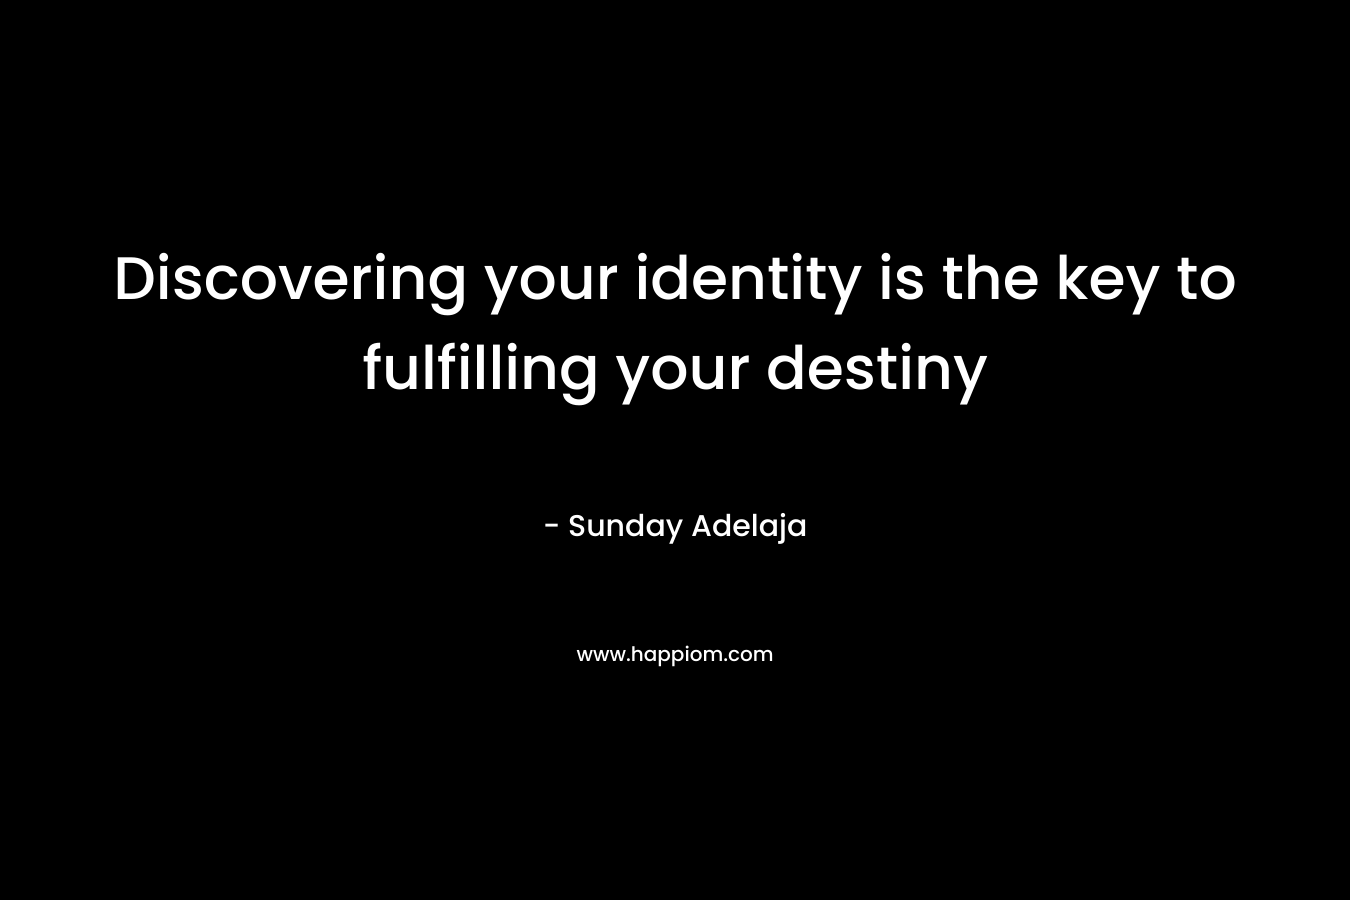 Discovering your identity is the key to fulfilling your destiny